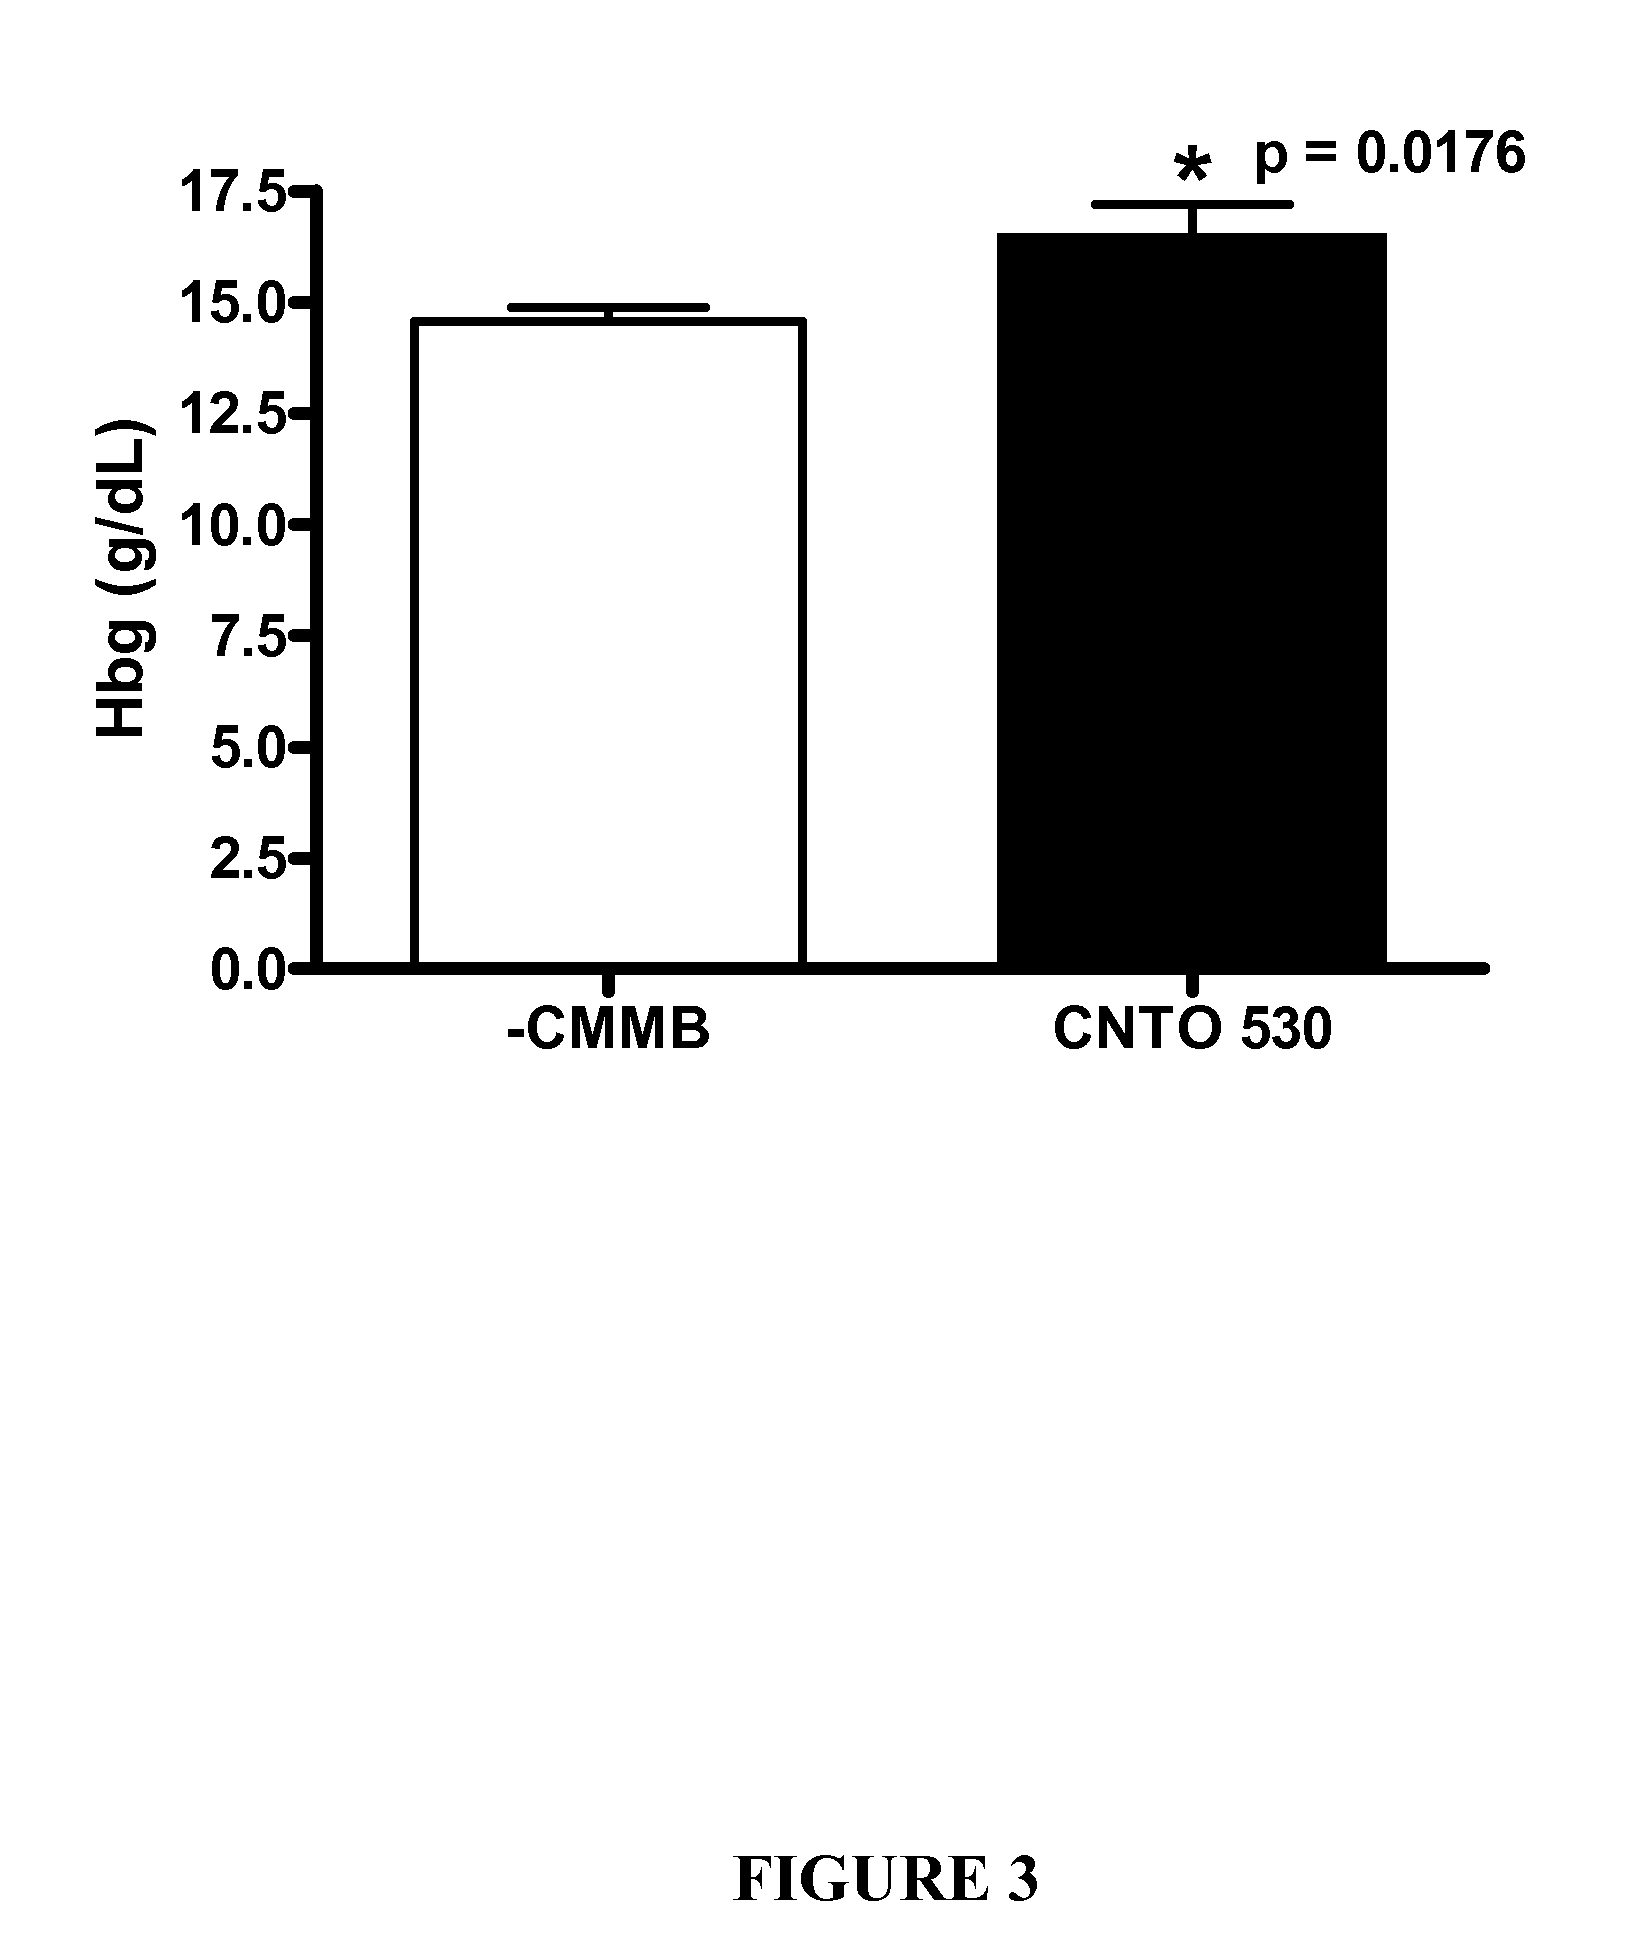 Human epo mimetic hinge core mimetibodies, compositions, methods and uses for preventing or treating glucose intolerance related conditions on renal disease associated anemia